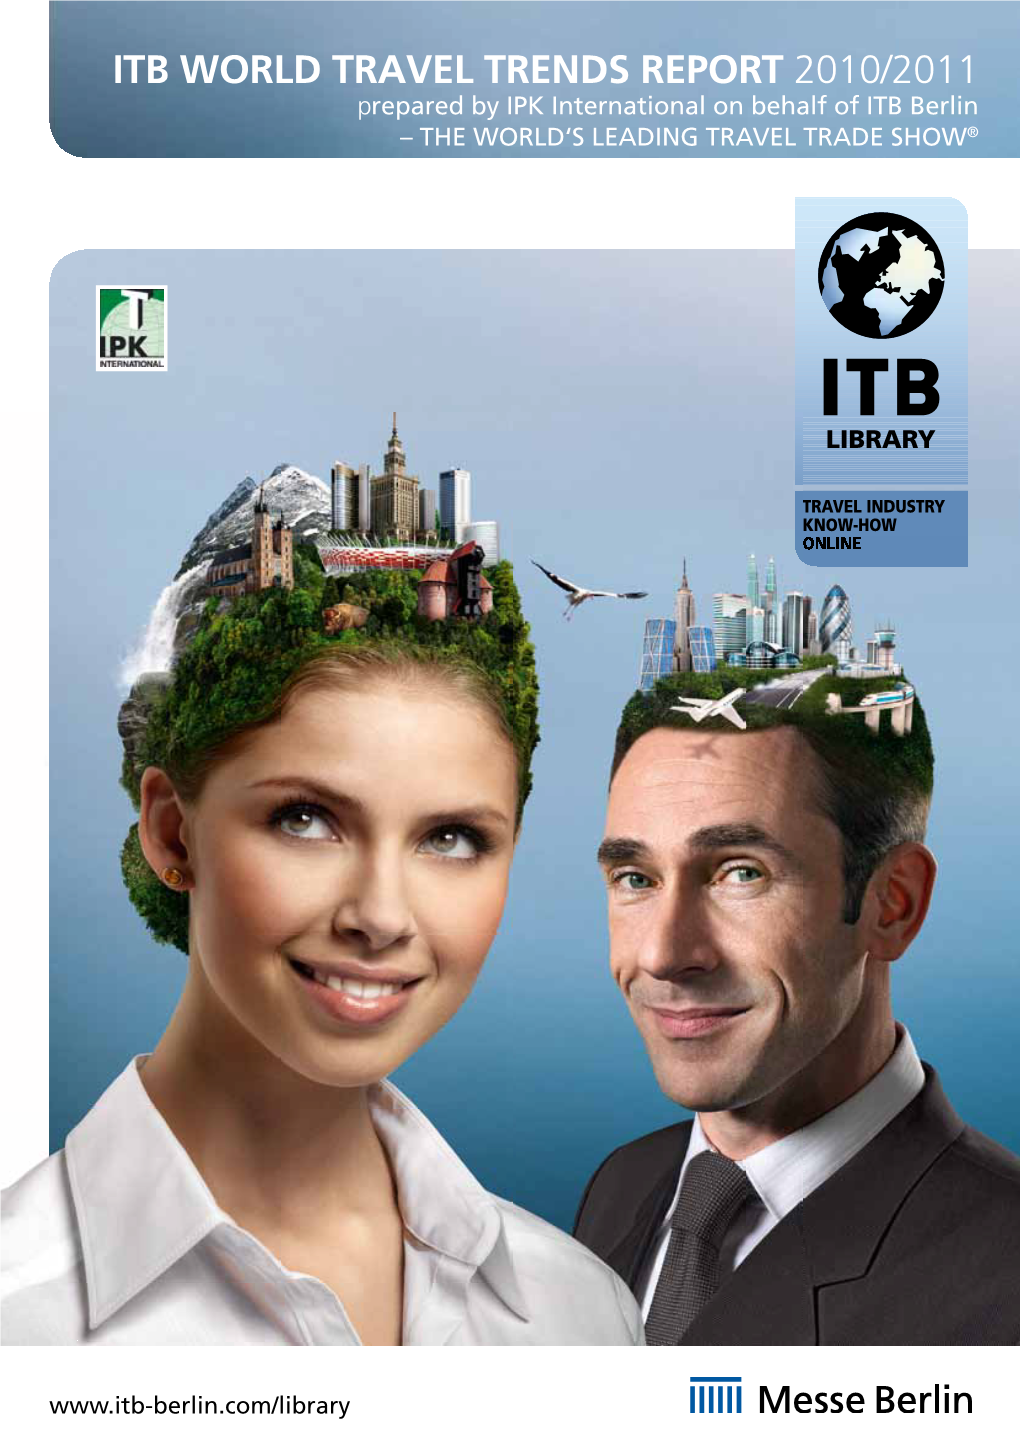 ITB WORLD TRAVEL TRENDS REPORT 2010/2011 Prepared by IPK International on Behalf of ITB Berlin – the WORLD‘S LEADING TRAVEL TRADE SHOW®